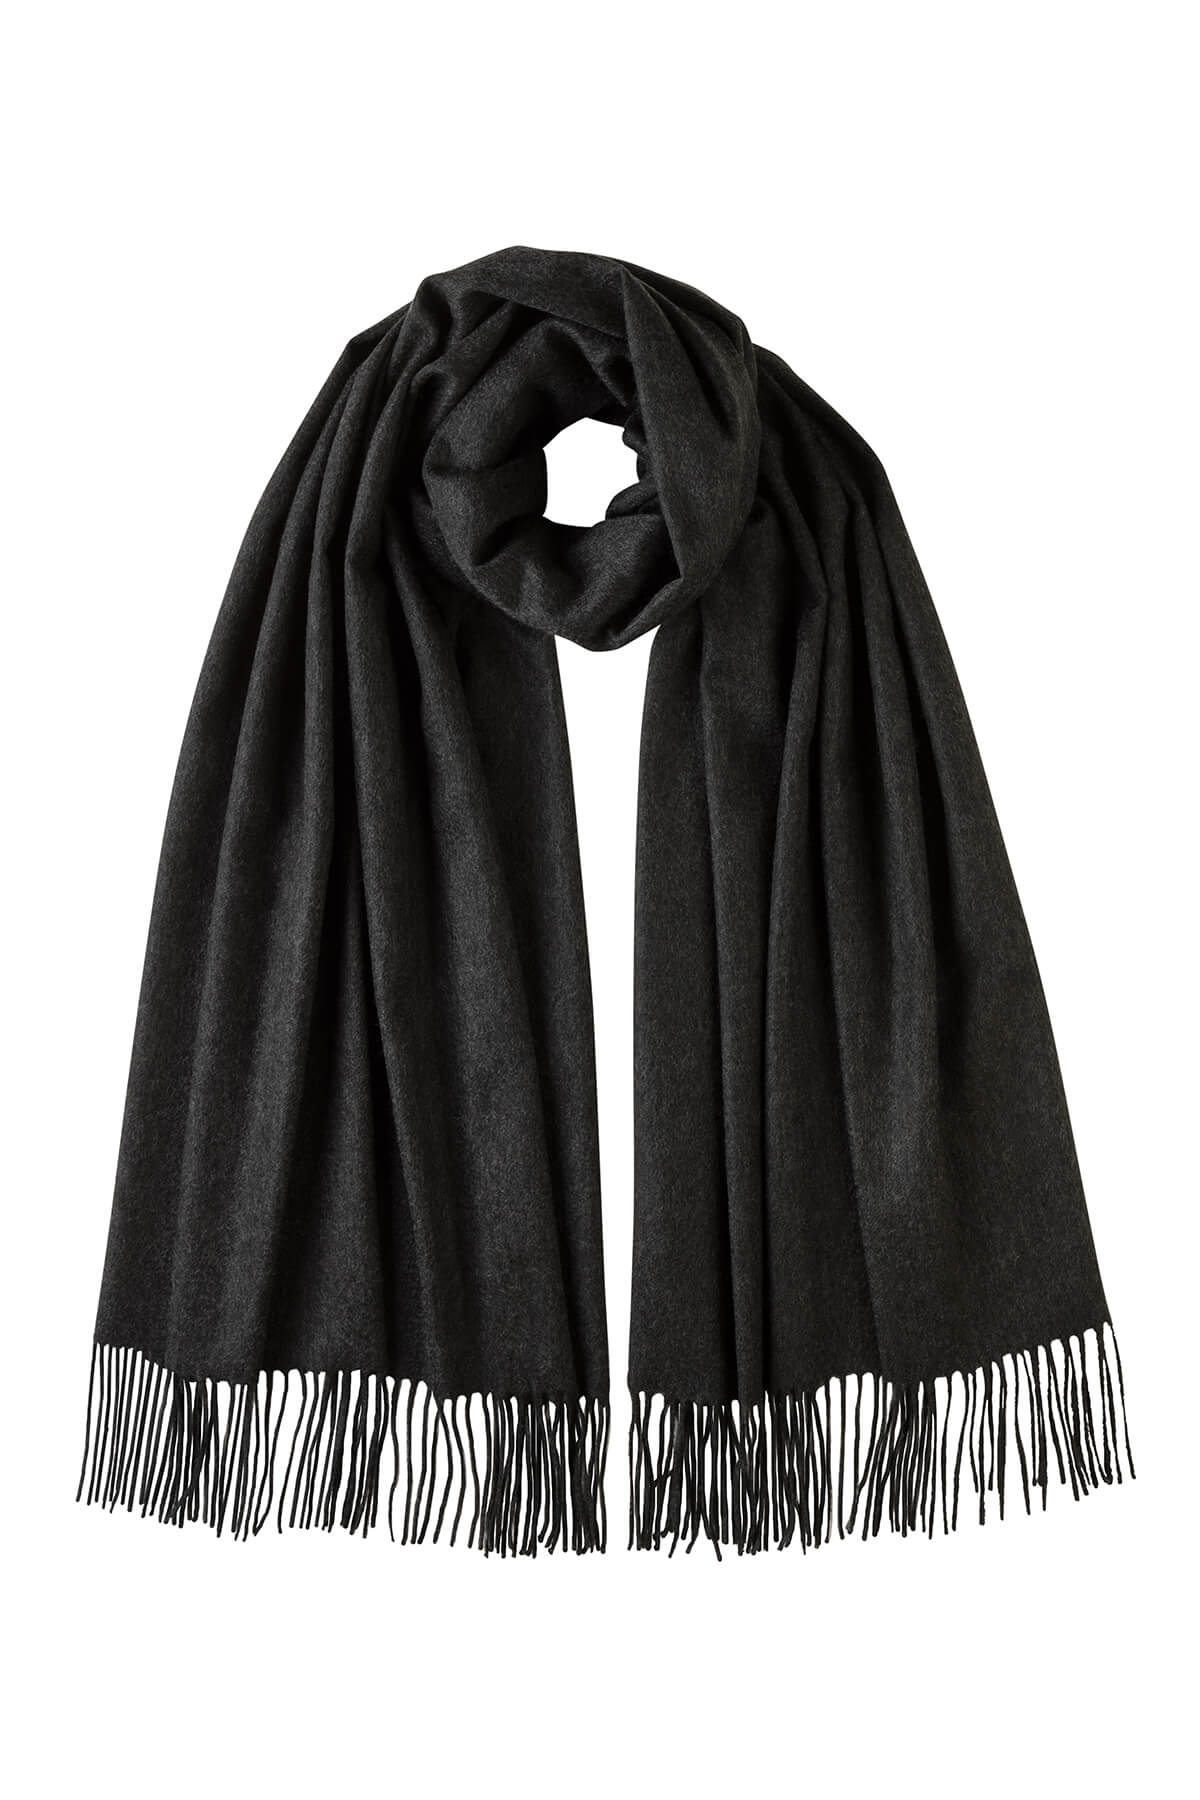 Johnstons of Elgin 100% Cashmere Stole in Charcoal on a white background WA000056HA0700N/A